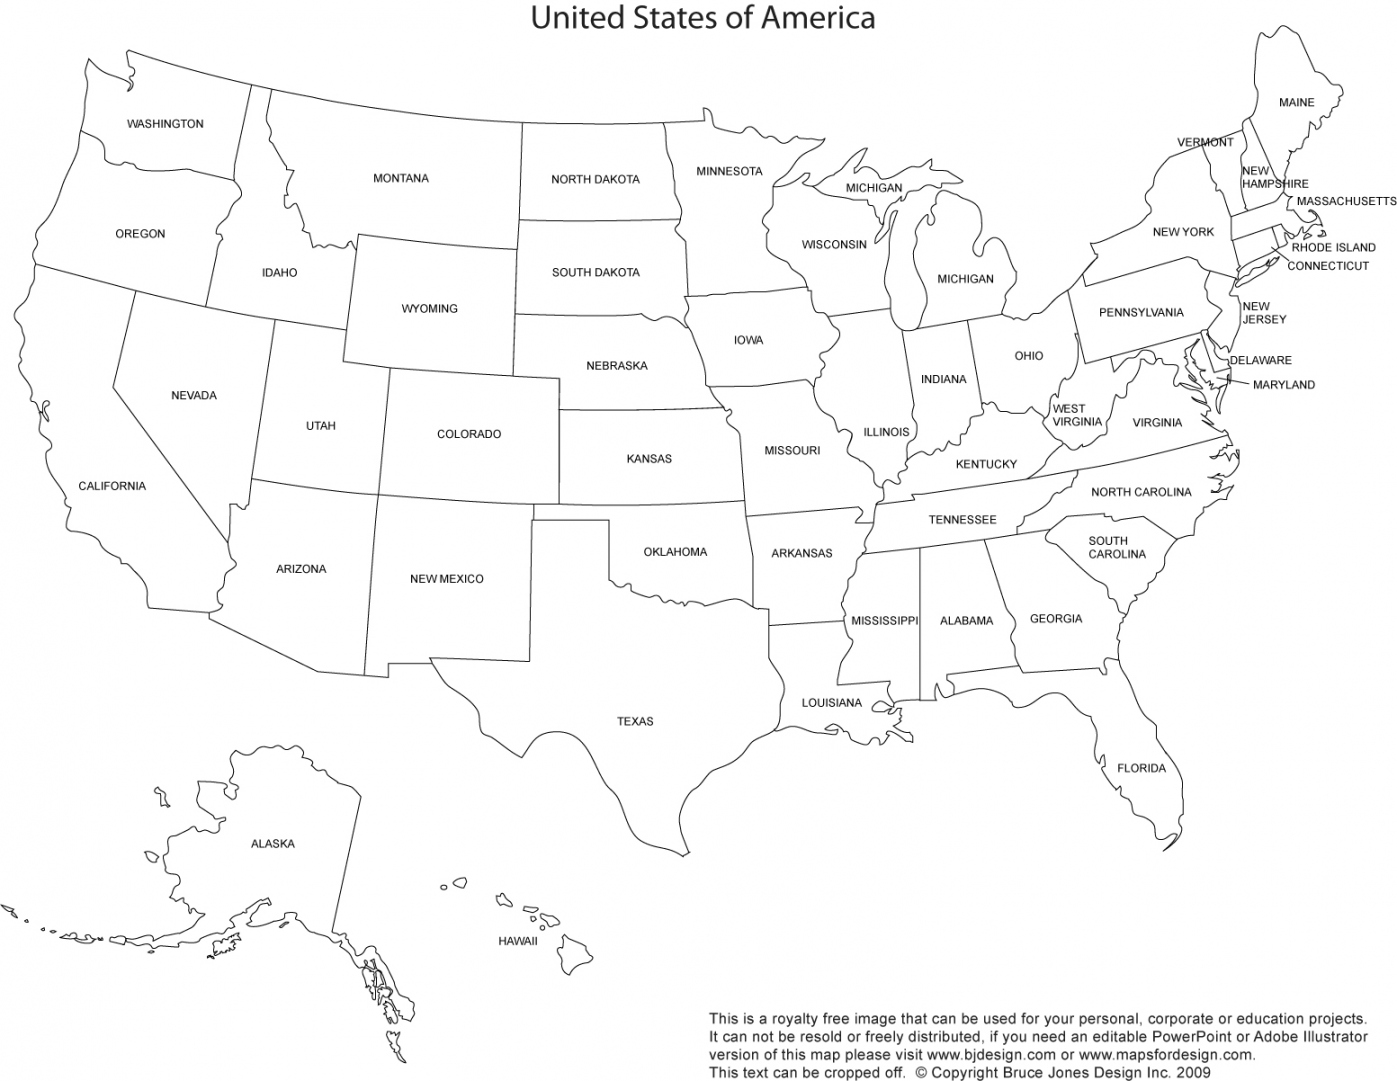 Free Printable Map of The United States - Printable - US and Canada Printable, Blank Maps, Royalty Free • Clip art